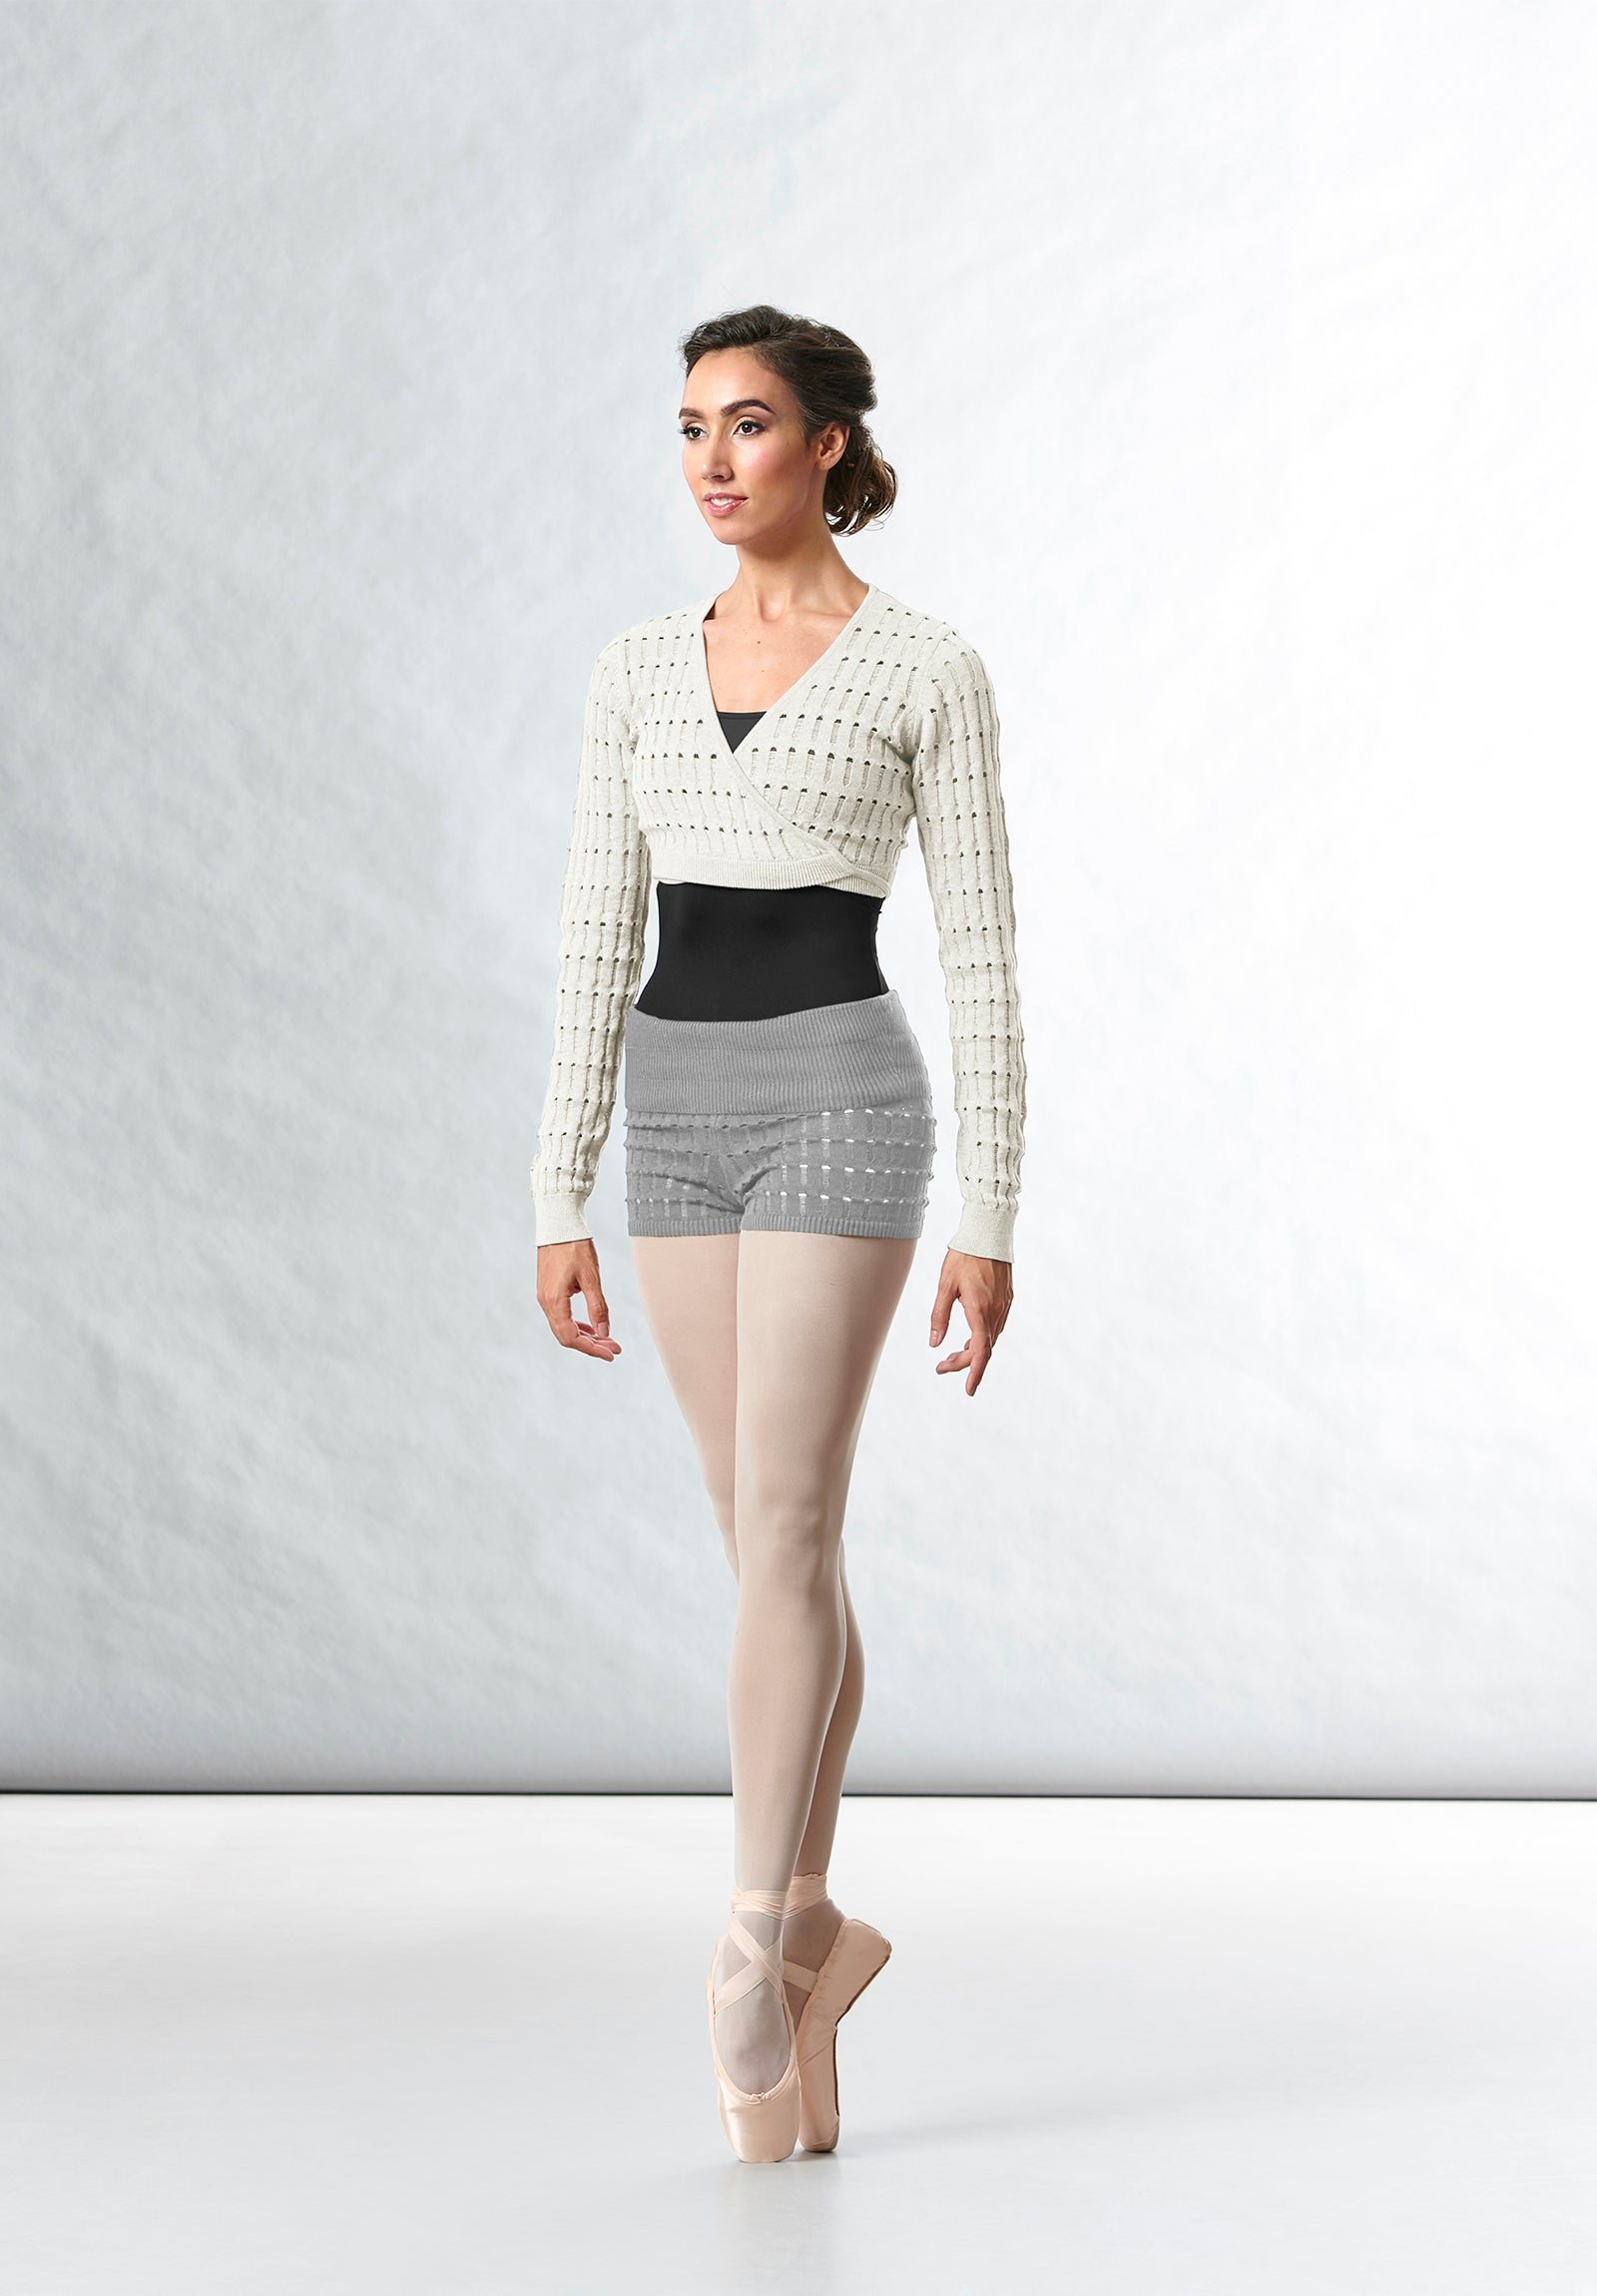 A female ballet dancer wearing a black BLOCH leotard, knitted wrap top and shorts